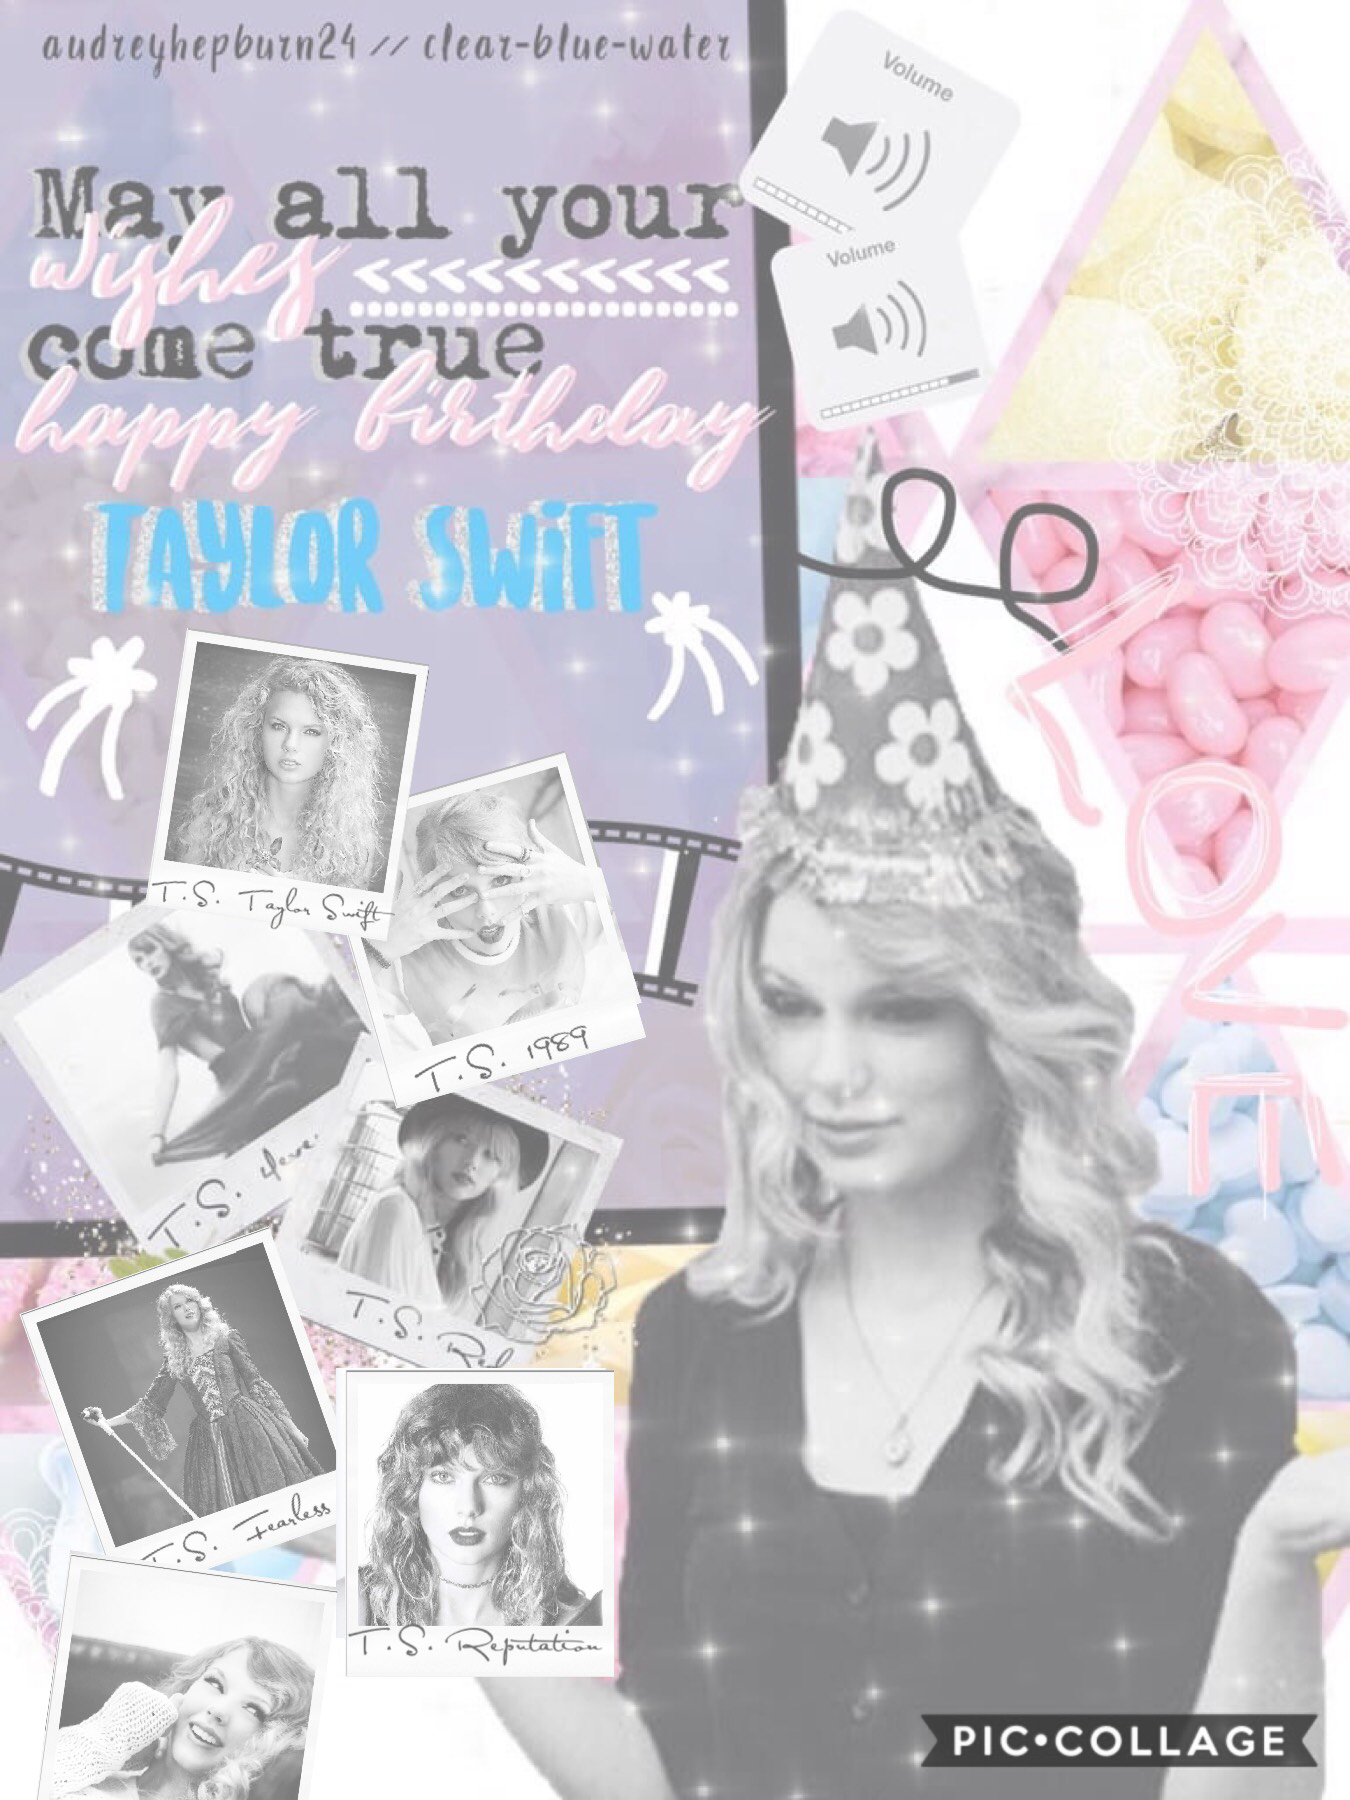 Happy Birthday Taylor Swift 🎂!!!!!
This was a collab with my bestie audreyhepburn24 who recently disappeared (Pleas let me know if anyone has info)
QOTD: What is your lucky number?
AOTD: 13!!!!!!
I can’t believe Taylor is already 29!!!! It seems like just